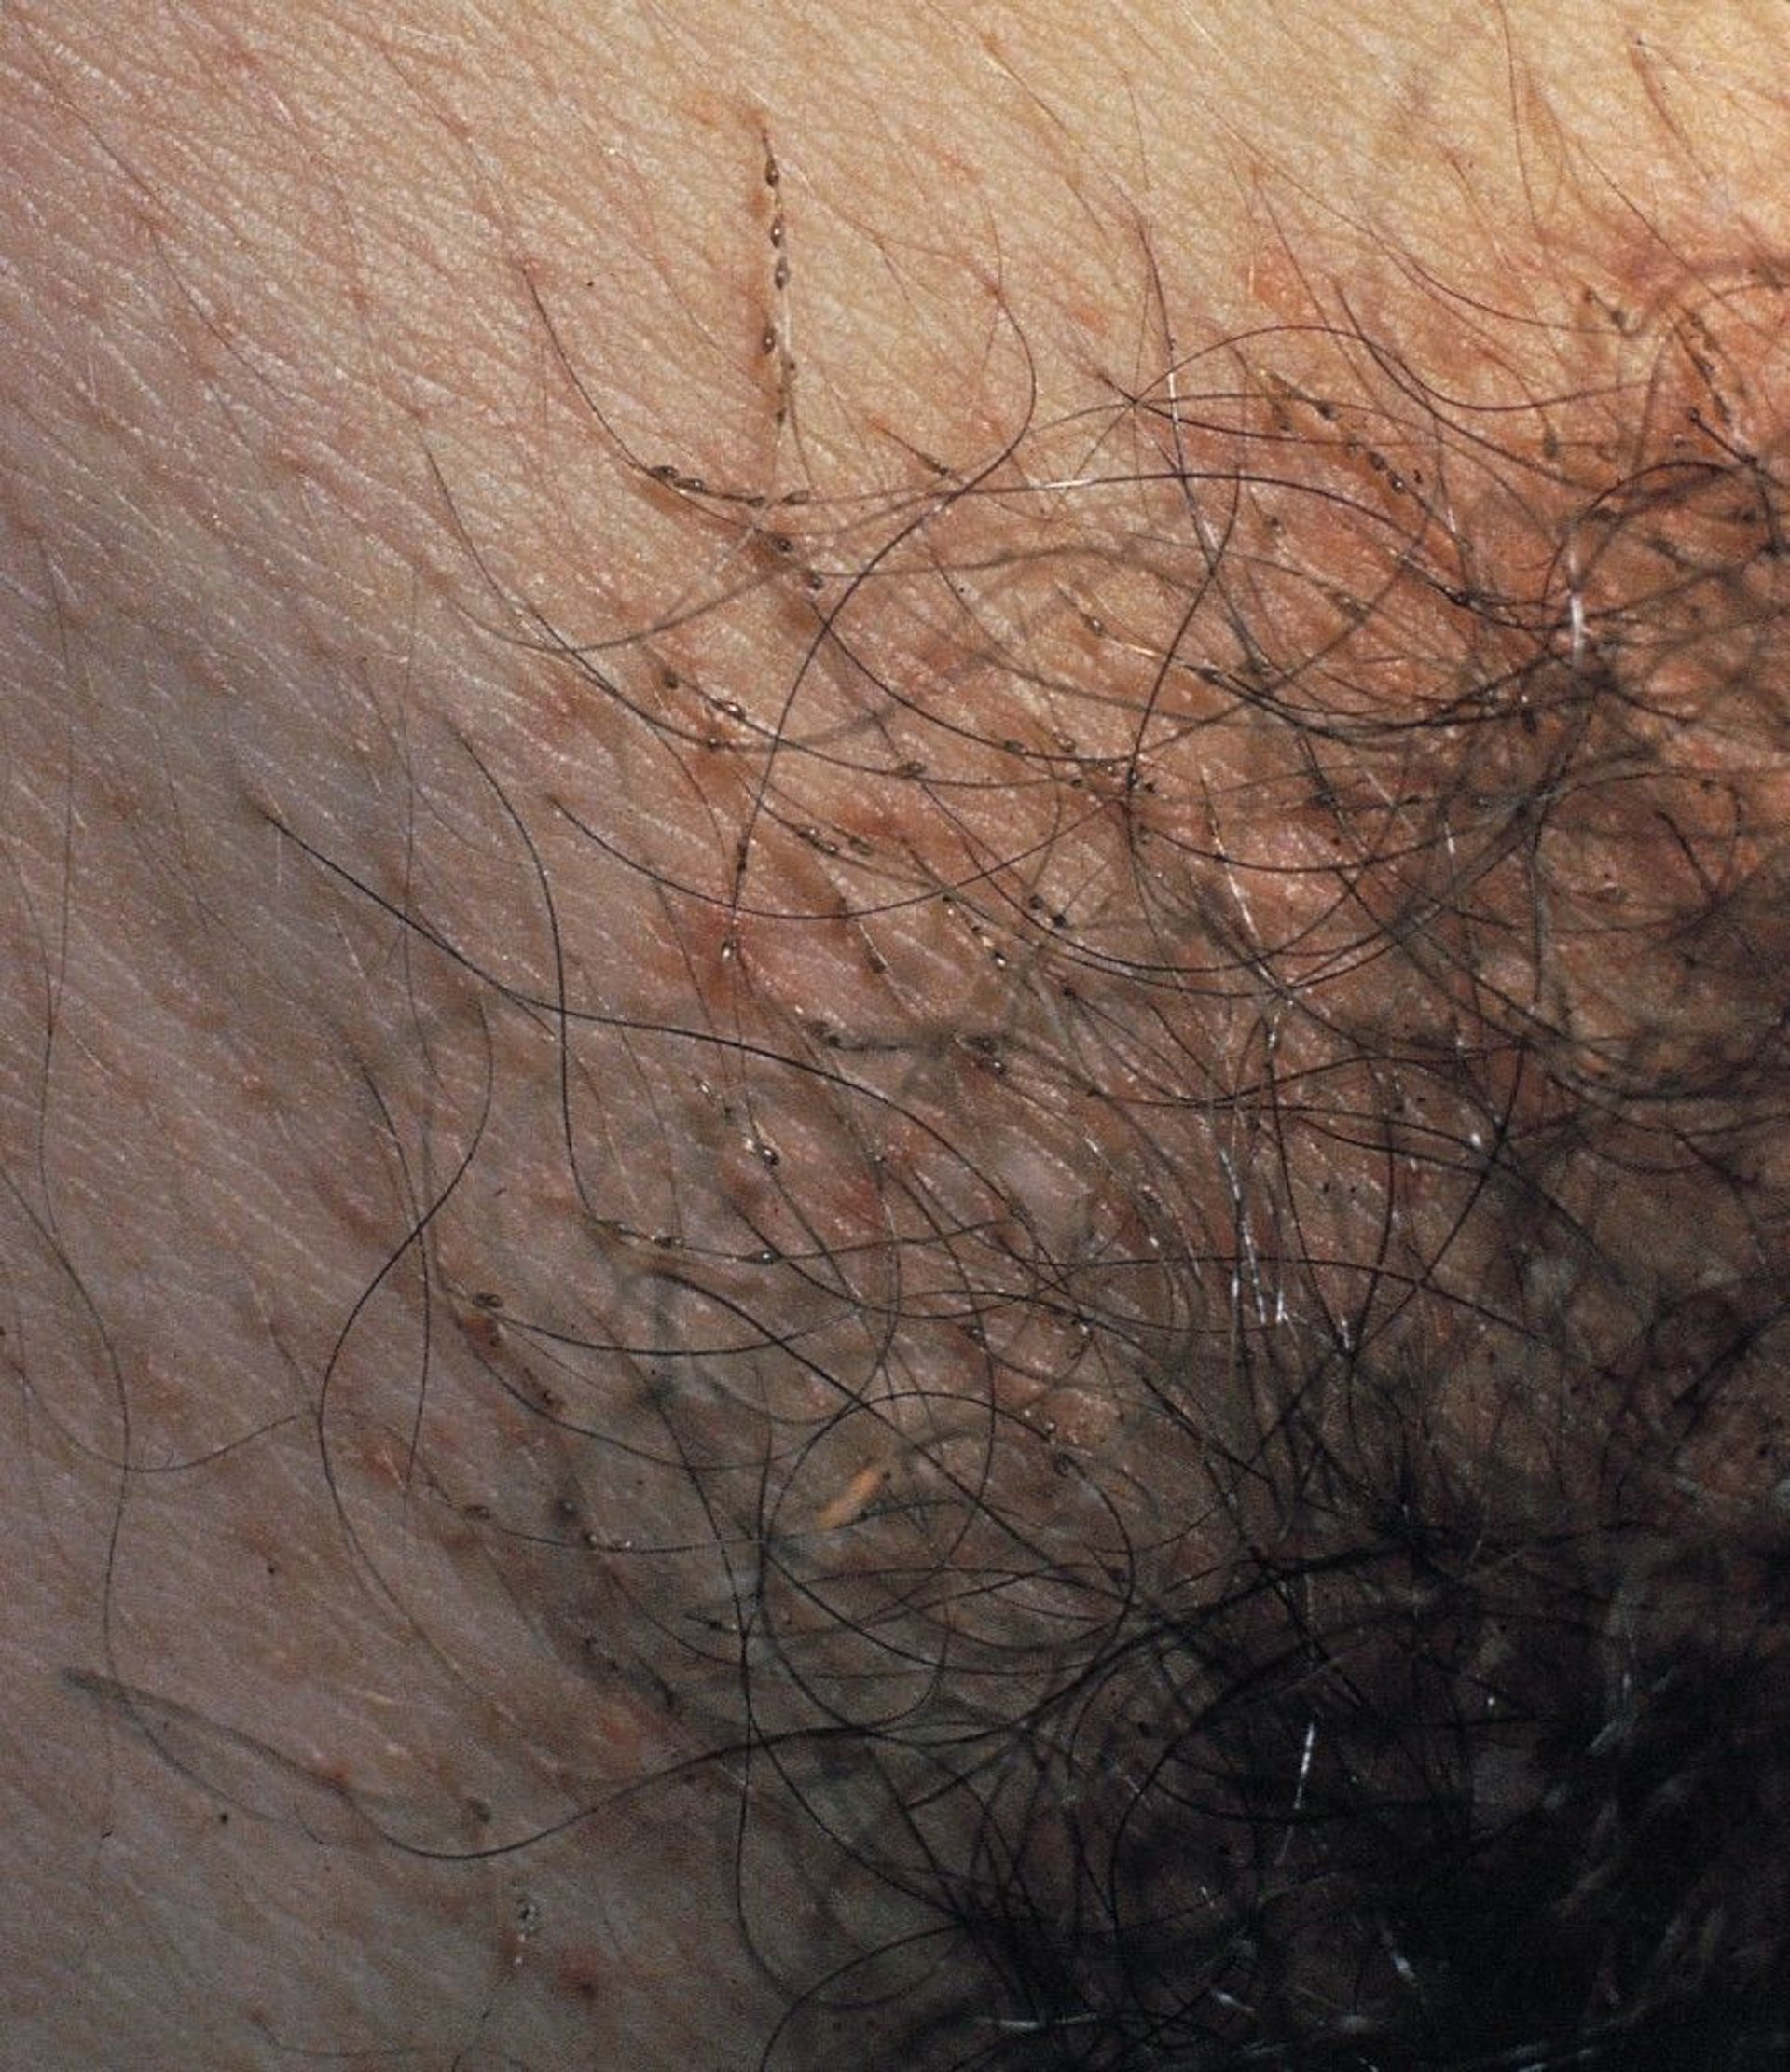 Pubic Lice With Nits Attached to Pubic Hair